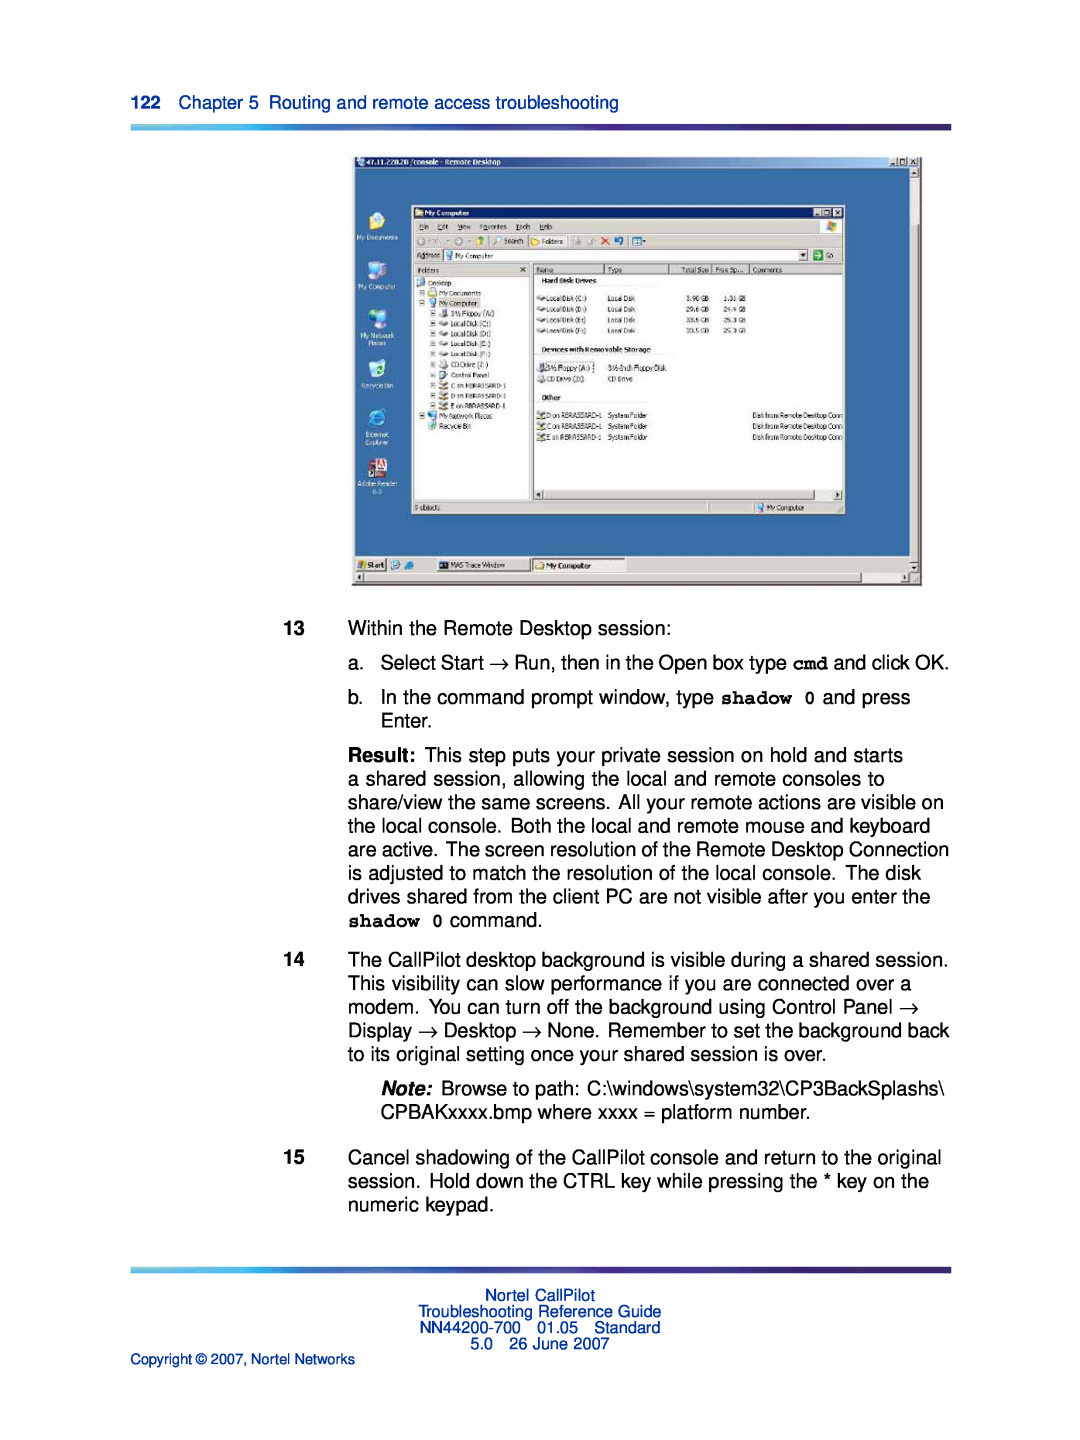 Nortel Networks NN44200-700 manual Within the Remote Desktop session 